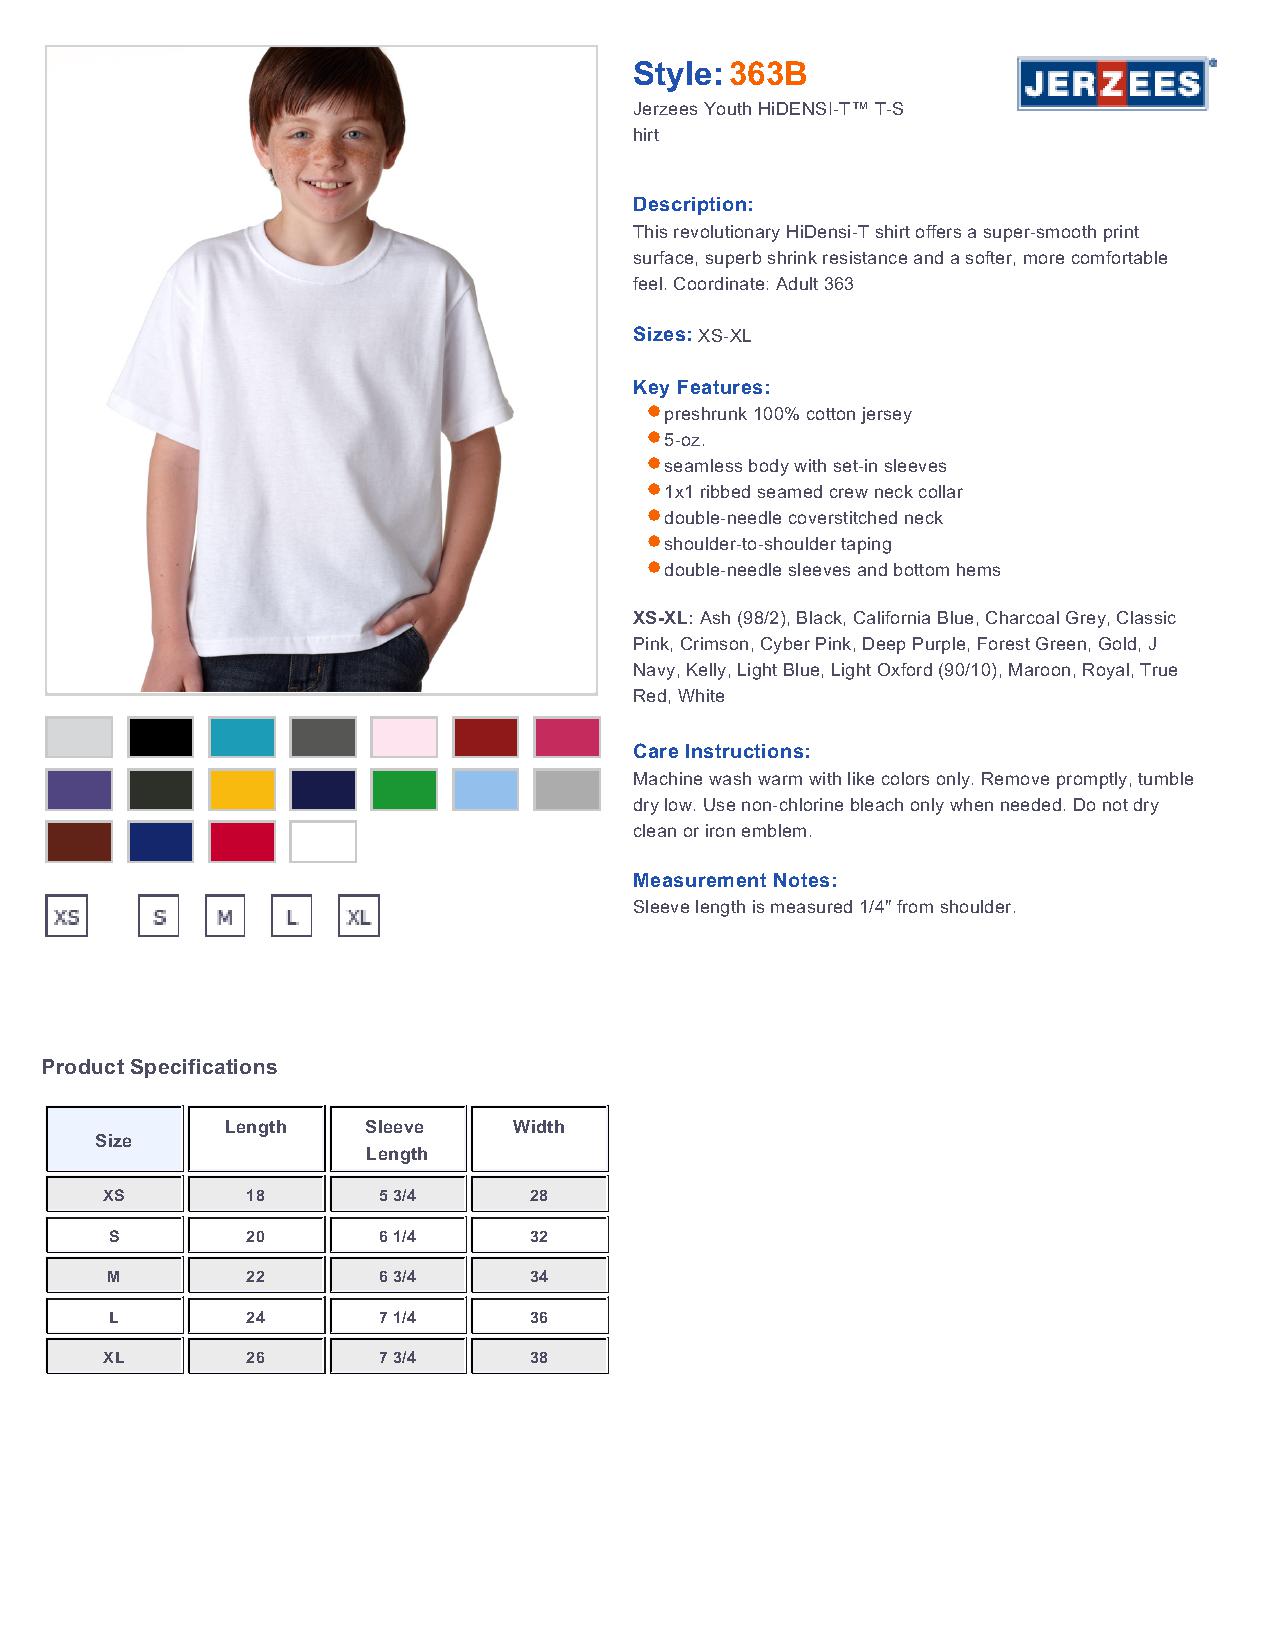 JERZEES - Youth HiDENSI-T T-Shirt - 363B $2.56 - Youth's T-Shirts